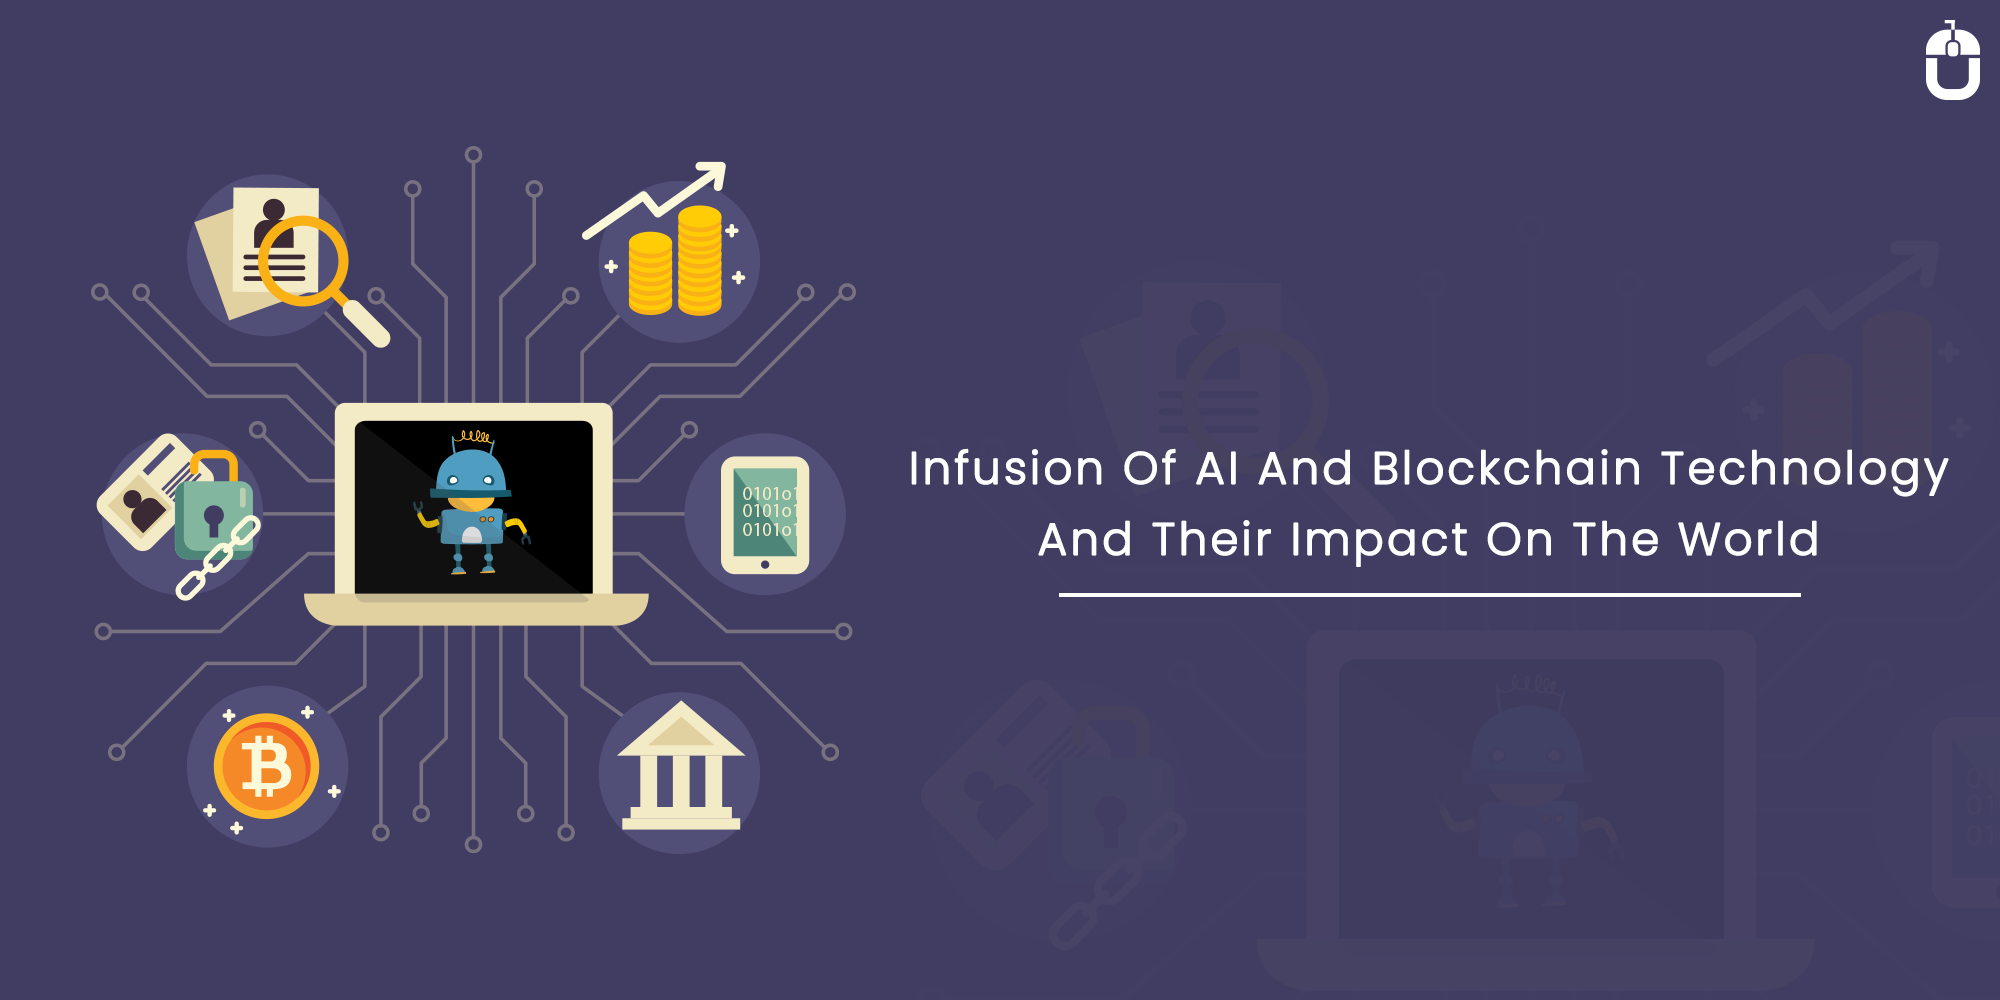 Infusion Of AI And Blockchain Technology And Their Impact On The World